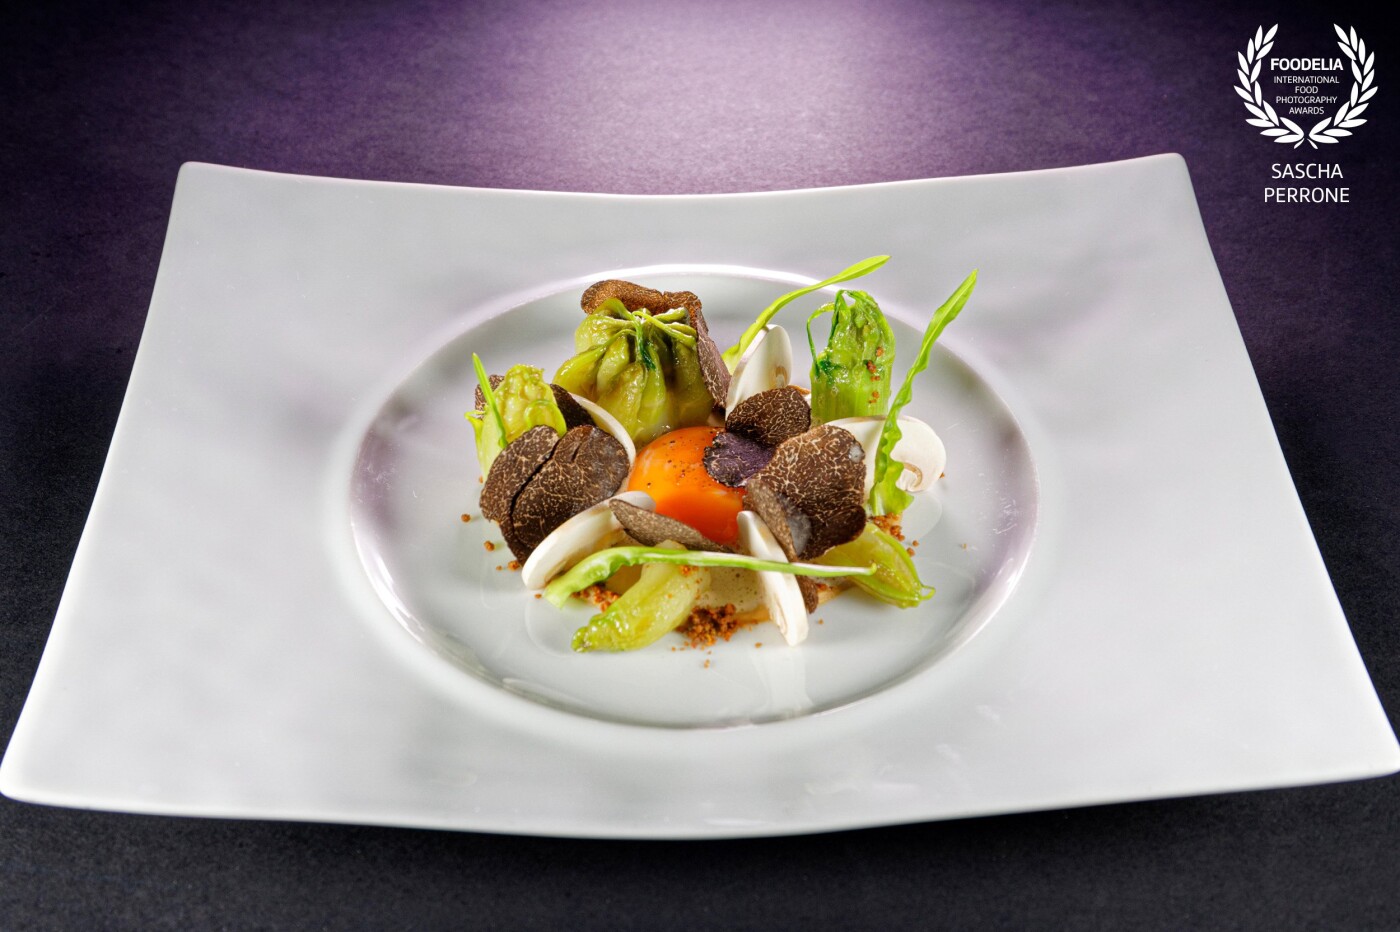 A creative dish by chef Nils Henkel, one of the best chefs in Germany, which has been awarded two stars by the Michelin Guide in the Schwarzenstein restaurant. 